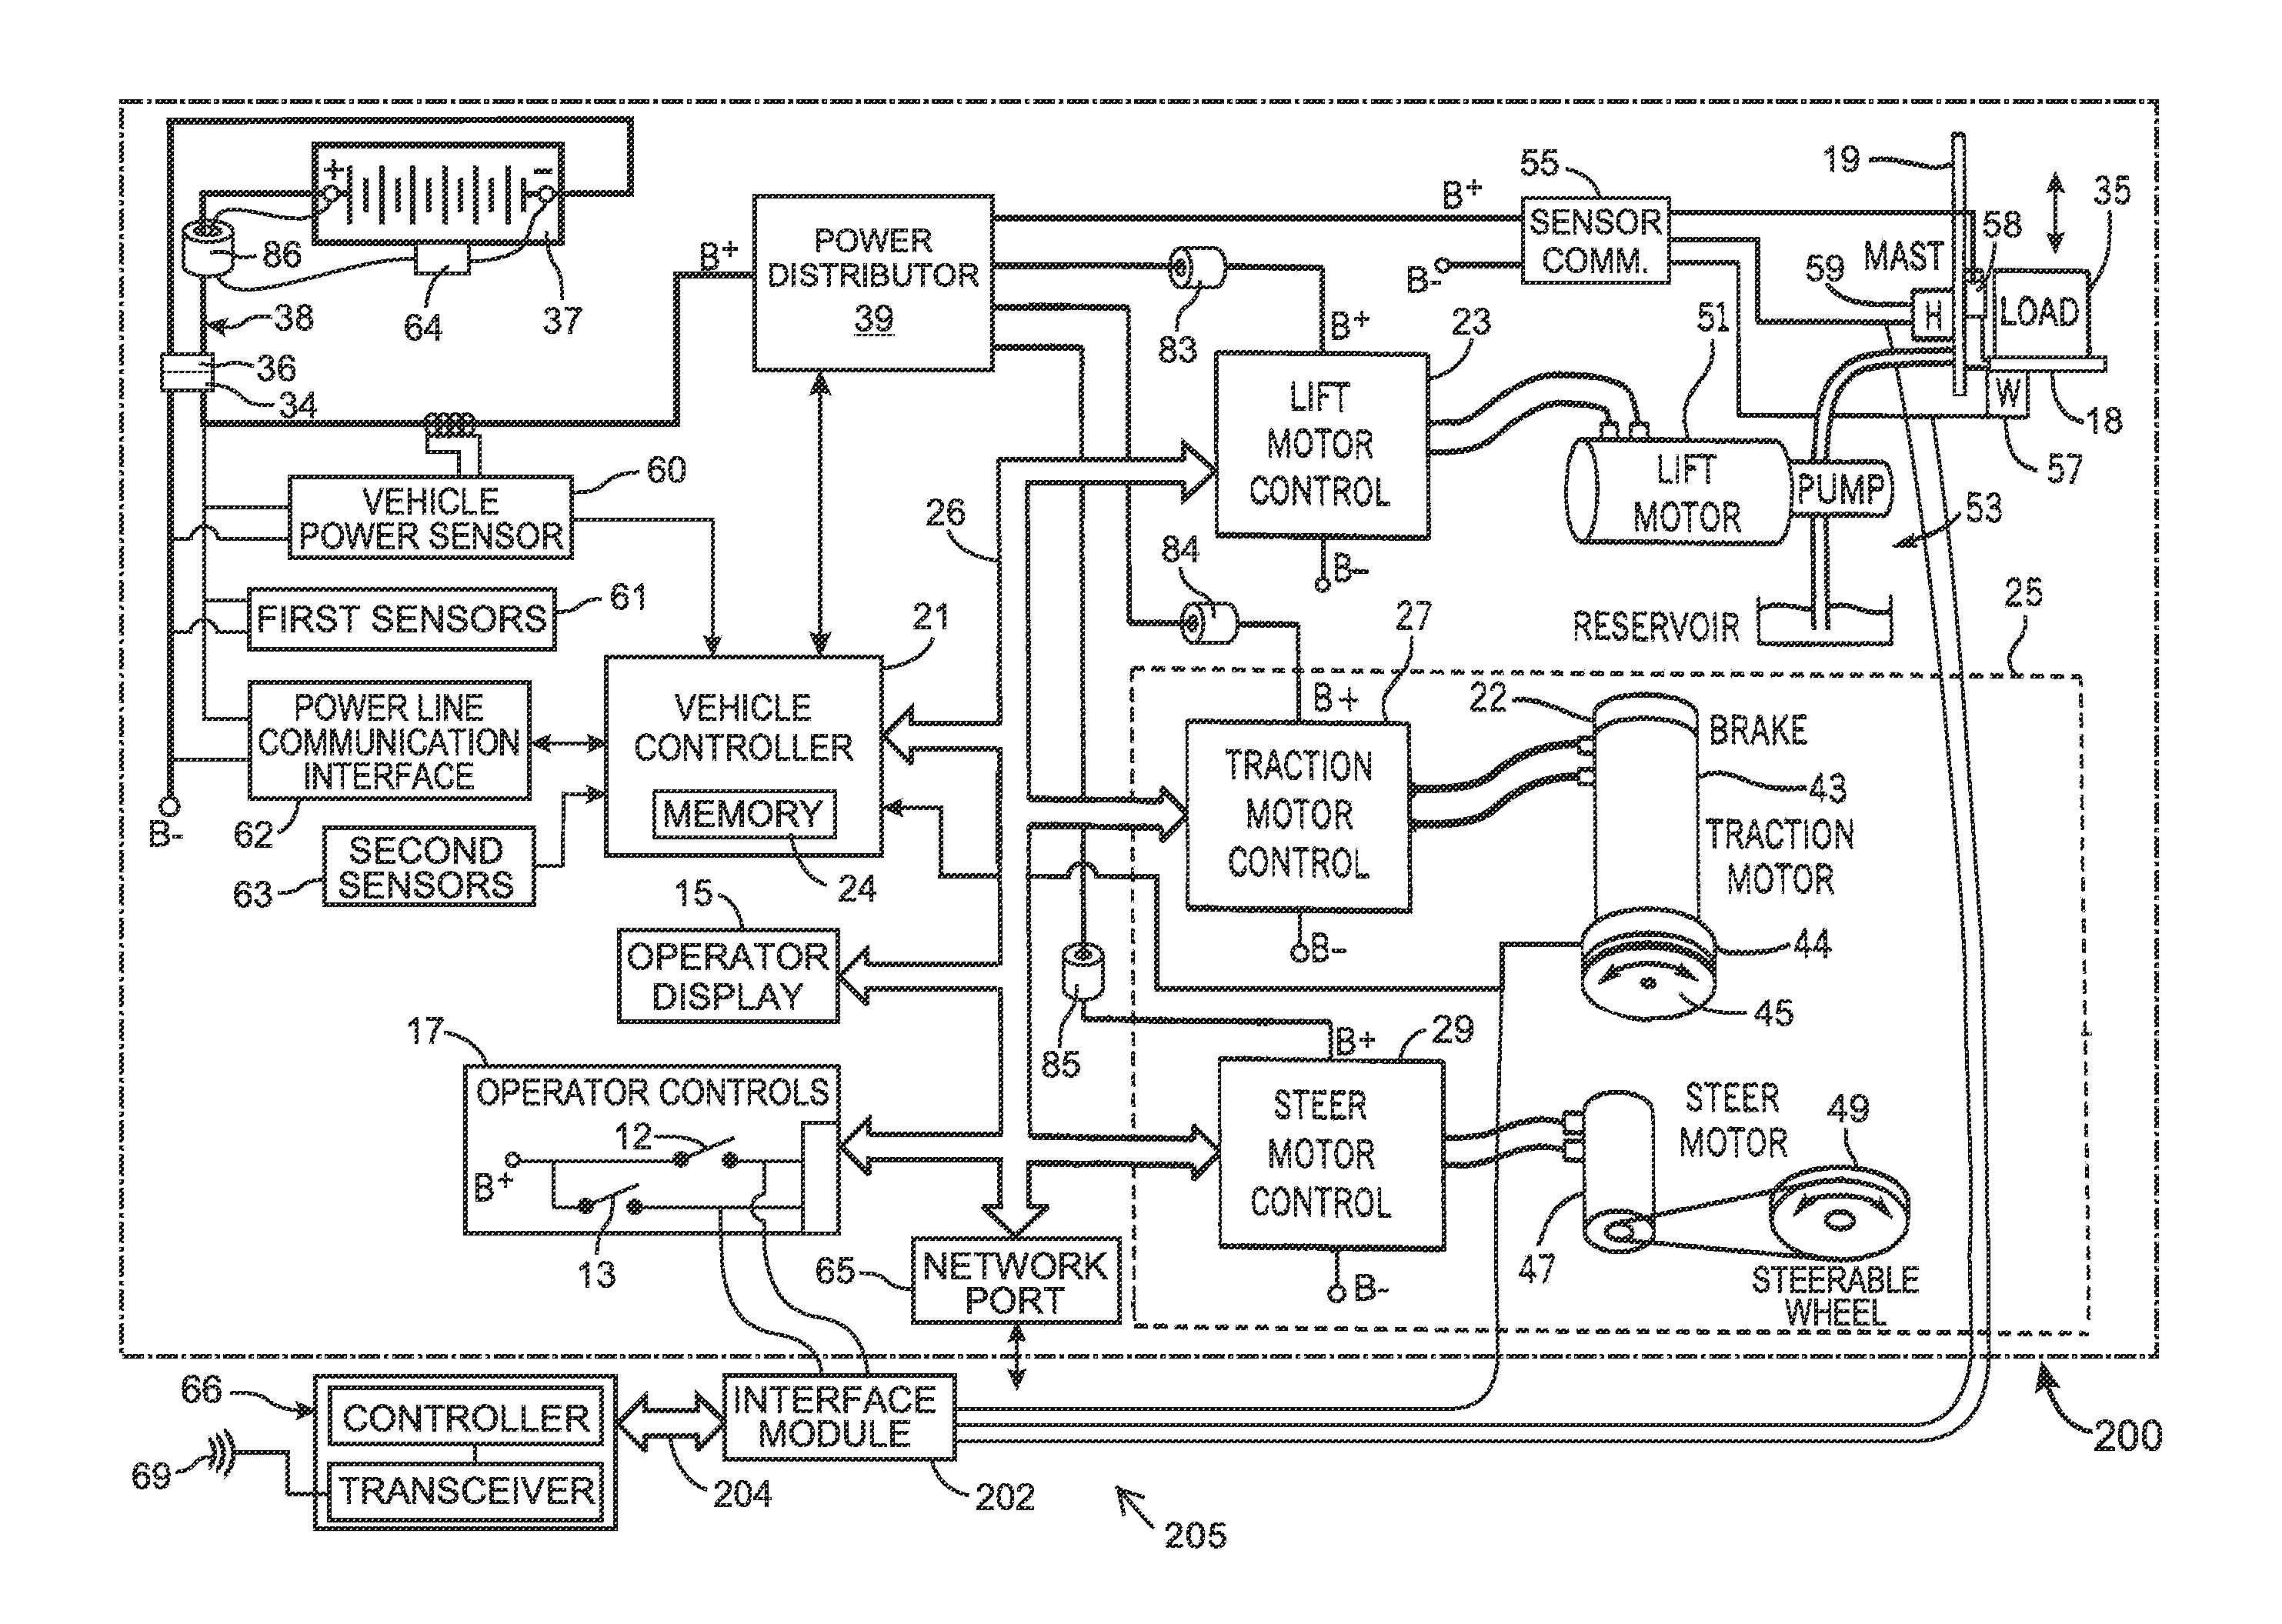 System for gathering data from an industrial vehicle